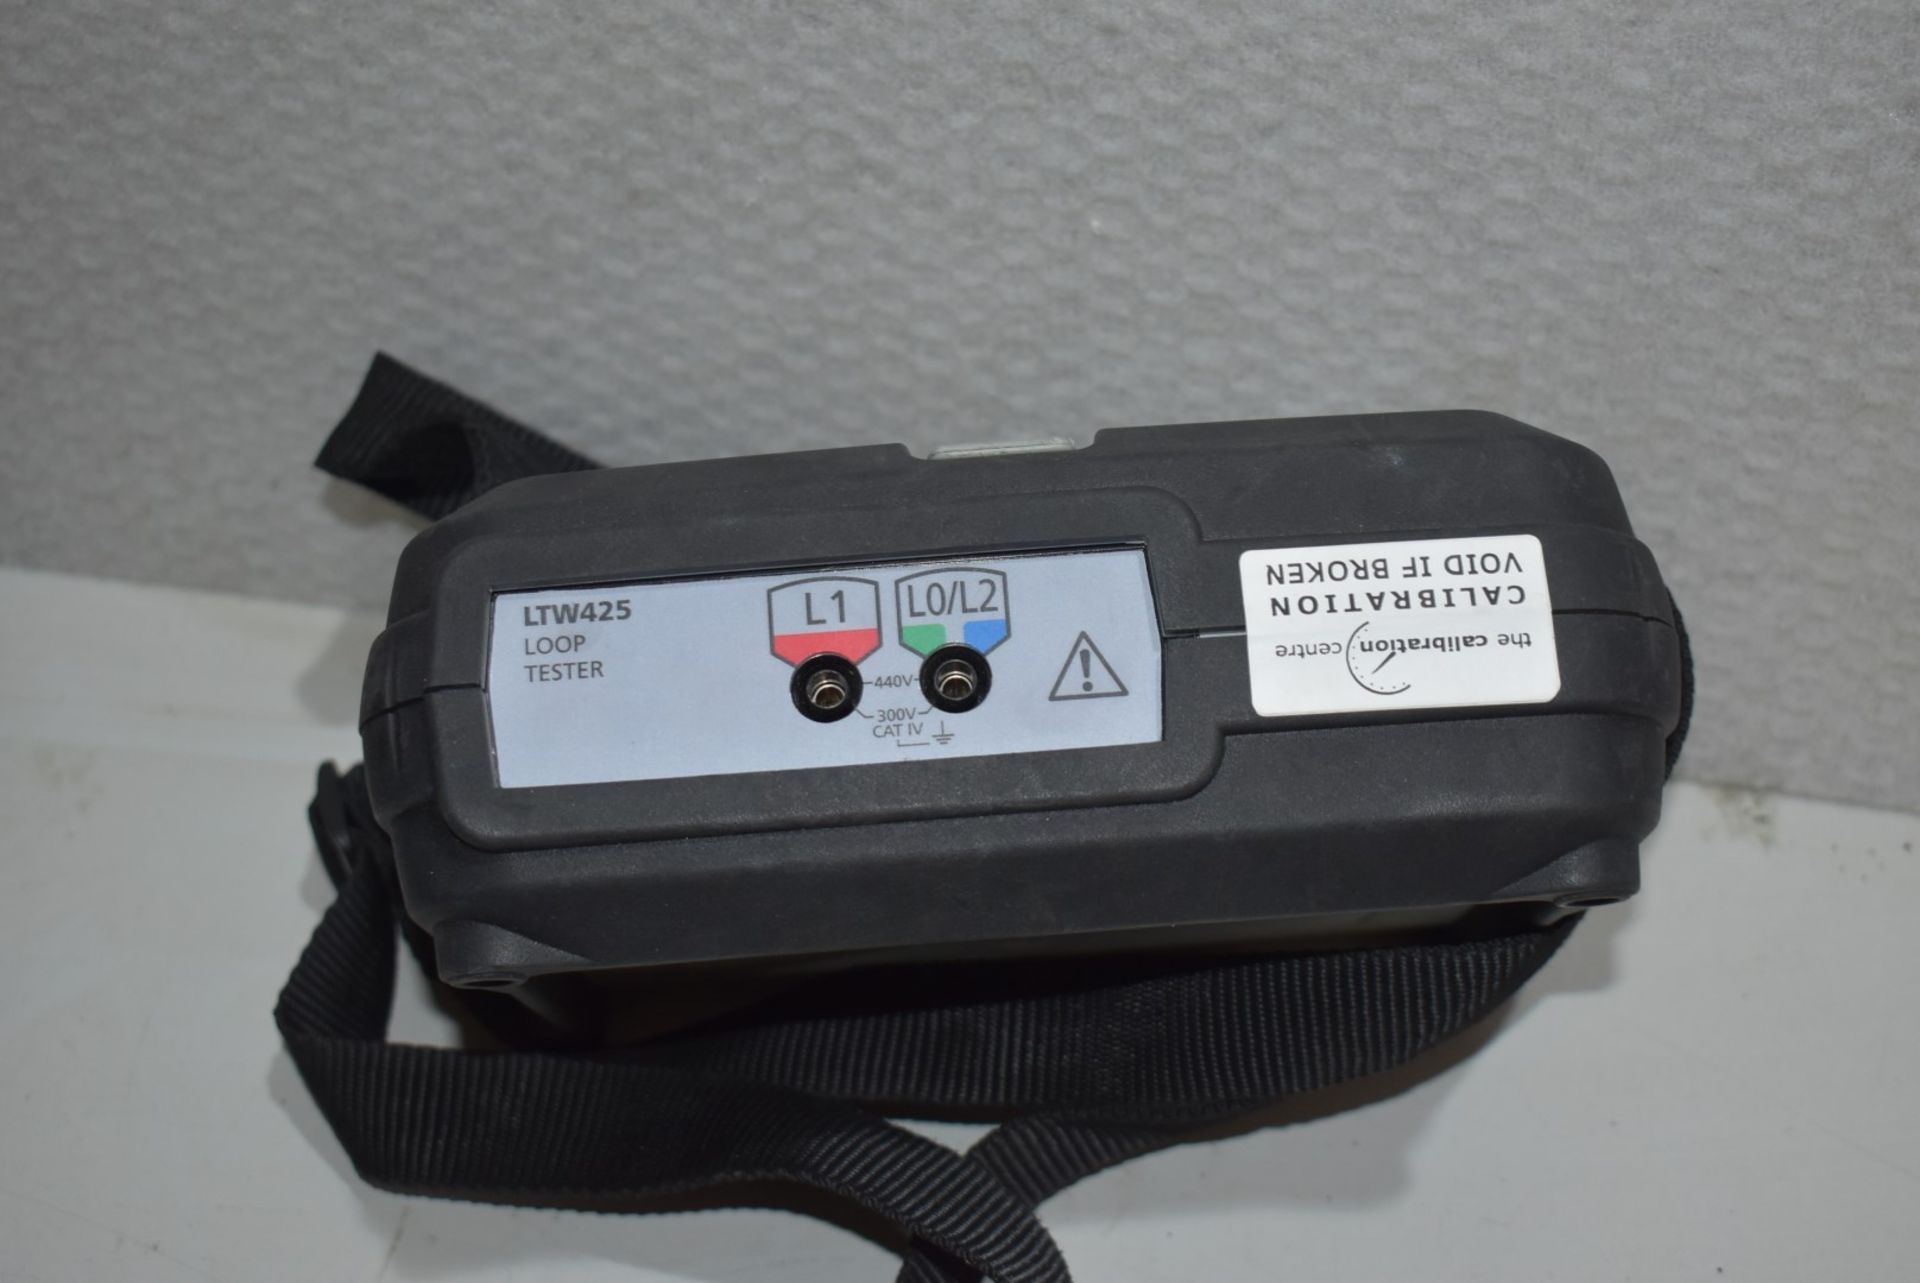 1 x MEGGER LTW425 Two-wire Non-tripping High Resolution Loop Tester - Ref: DS7549 ALT - CL816 - - Image 6 of 7